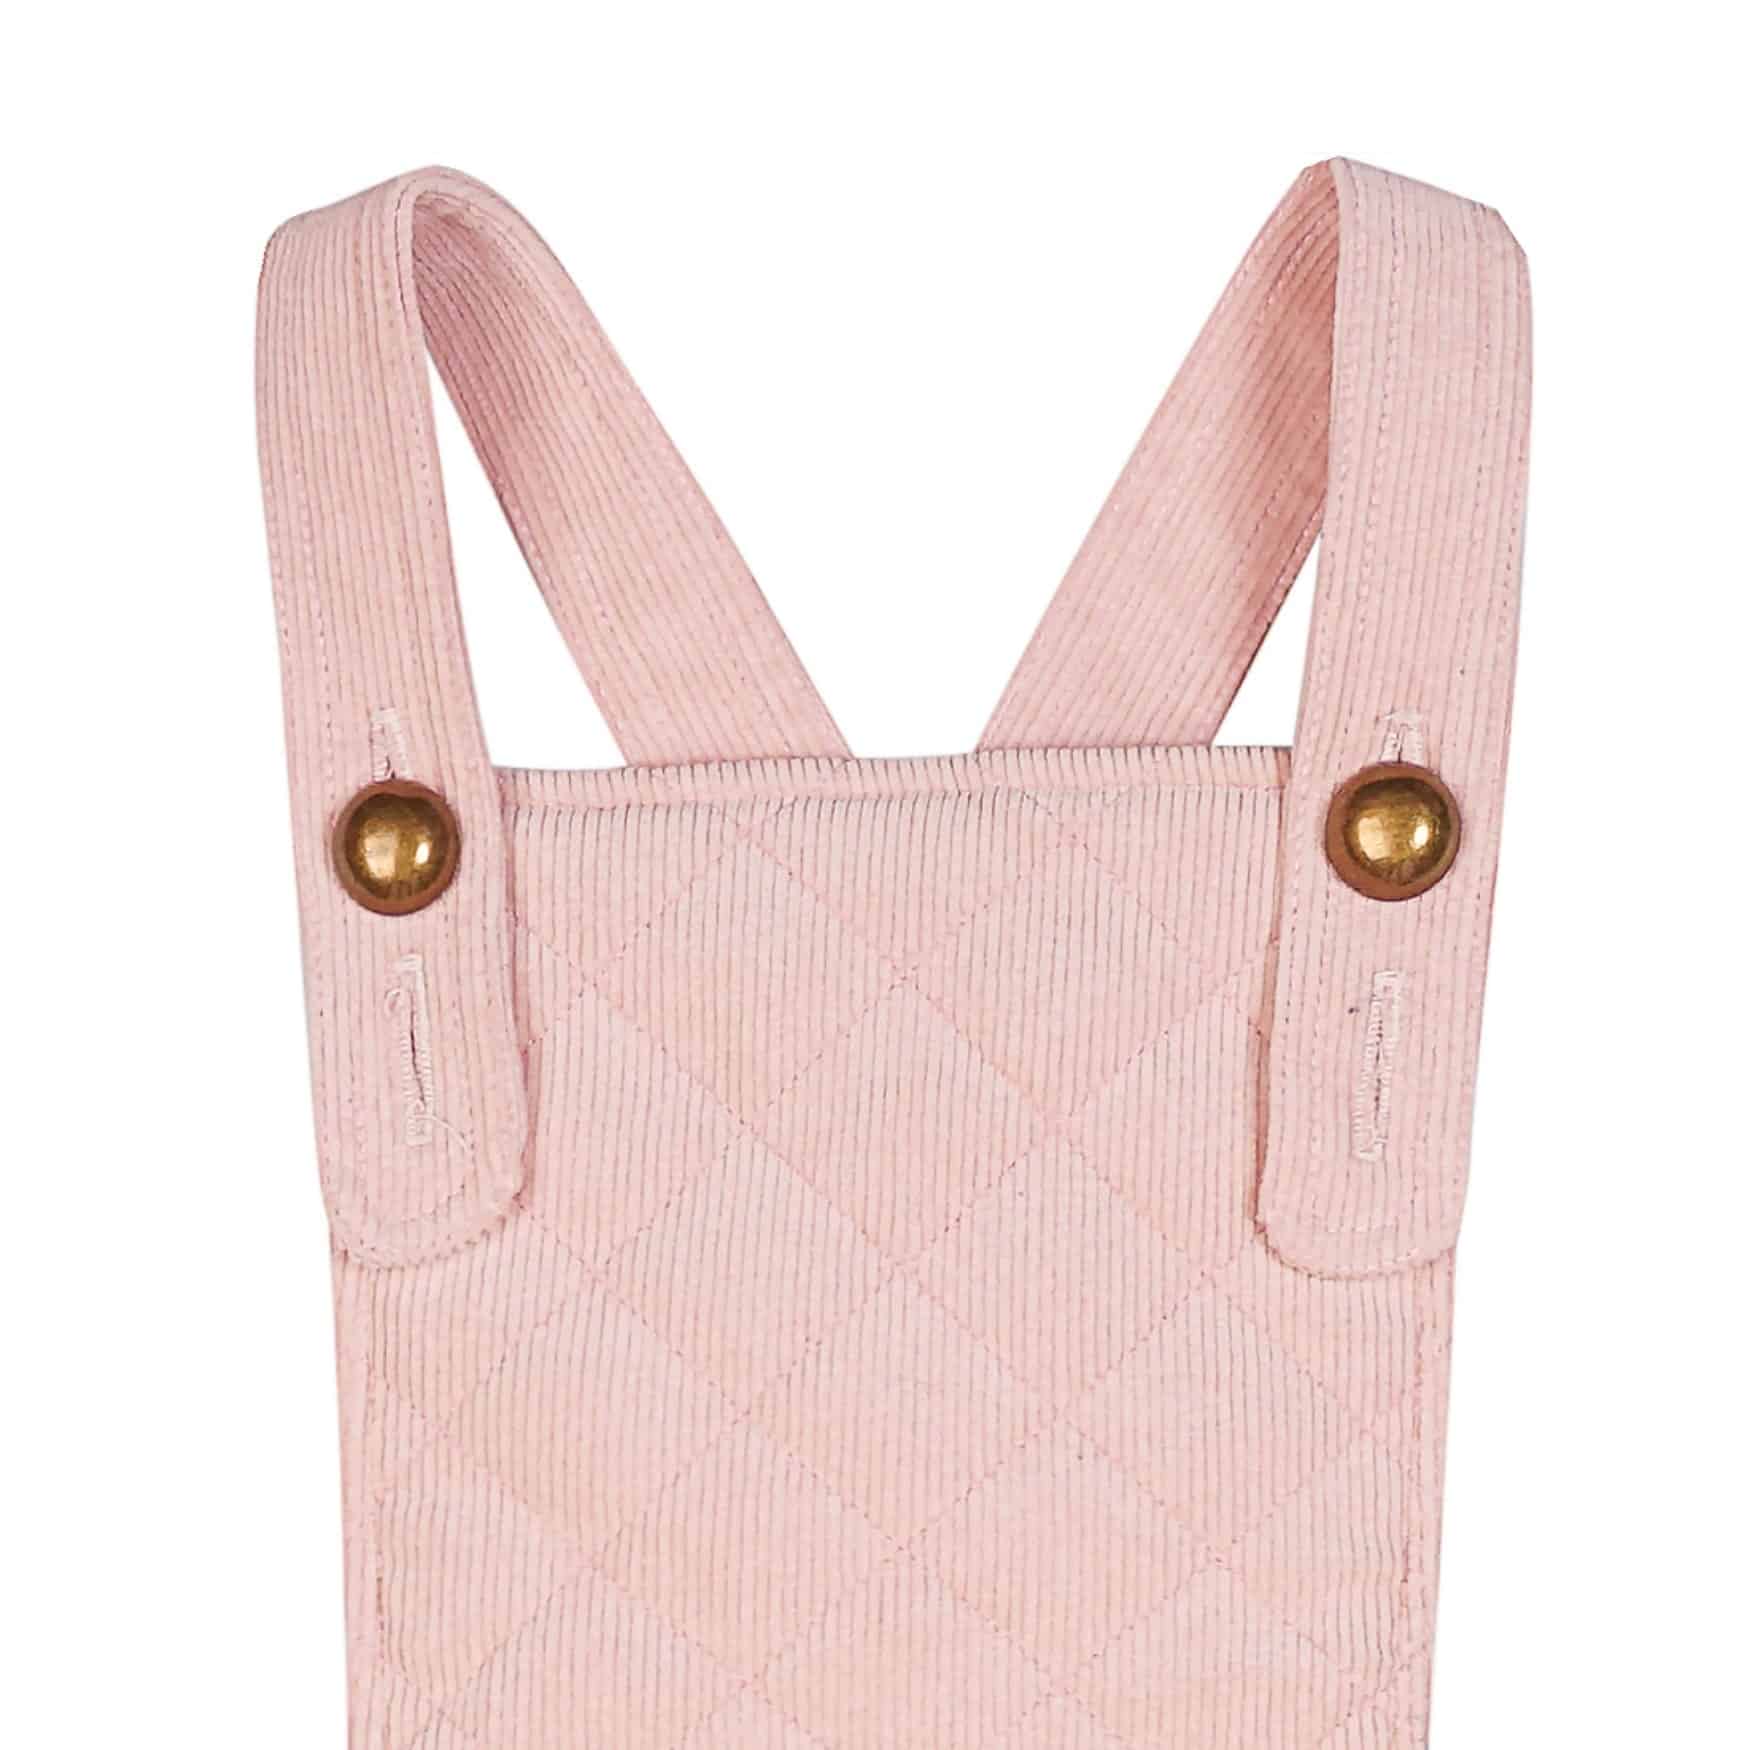 dungarees dress in pale pink velvet for girls and young women of the fashion brand for children la faute a voltaire